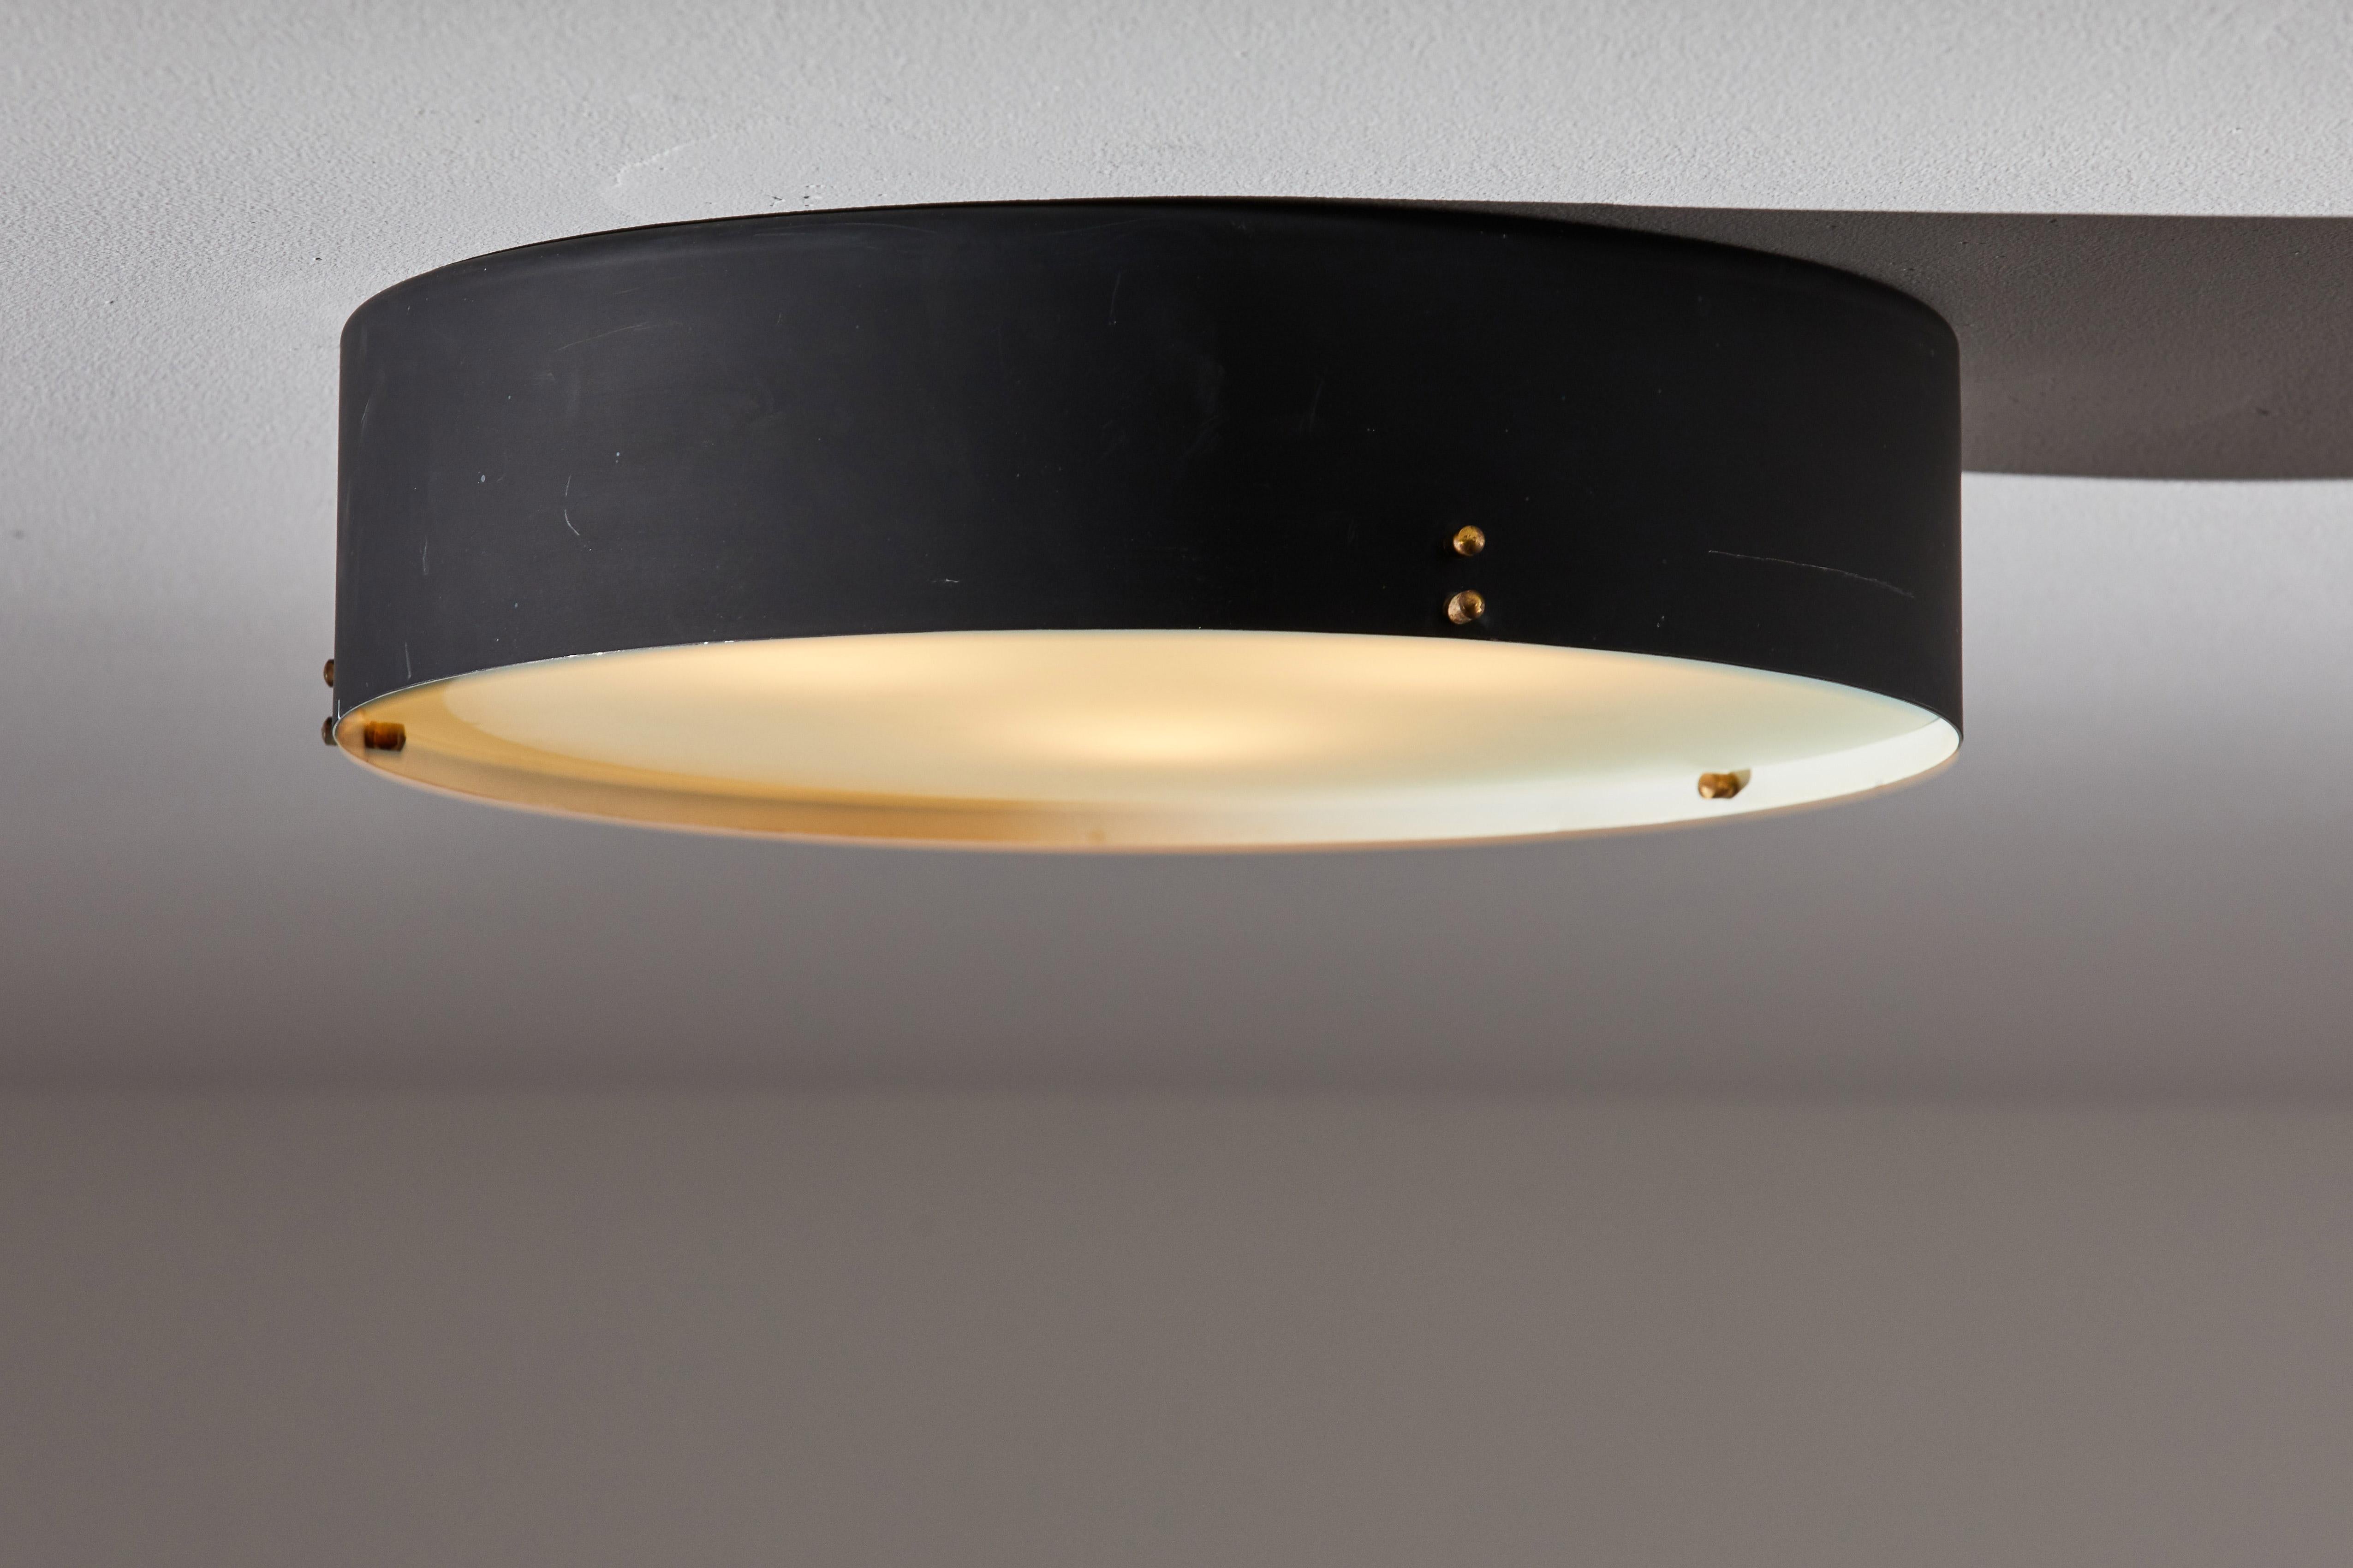 Single flush mount ceiling light by Bruno Gatta for Stilnovo. Designed and manufactured in Italy, circa 1960s. Enameled metal, glass, brass hardware. Rewired for U.S. junction boxes. Takes three E27 European candelabra sockets, 50w maximum each.